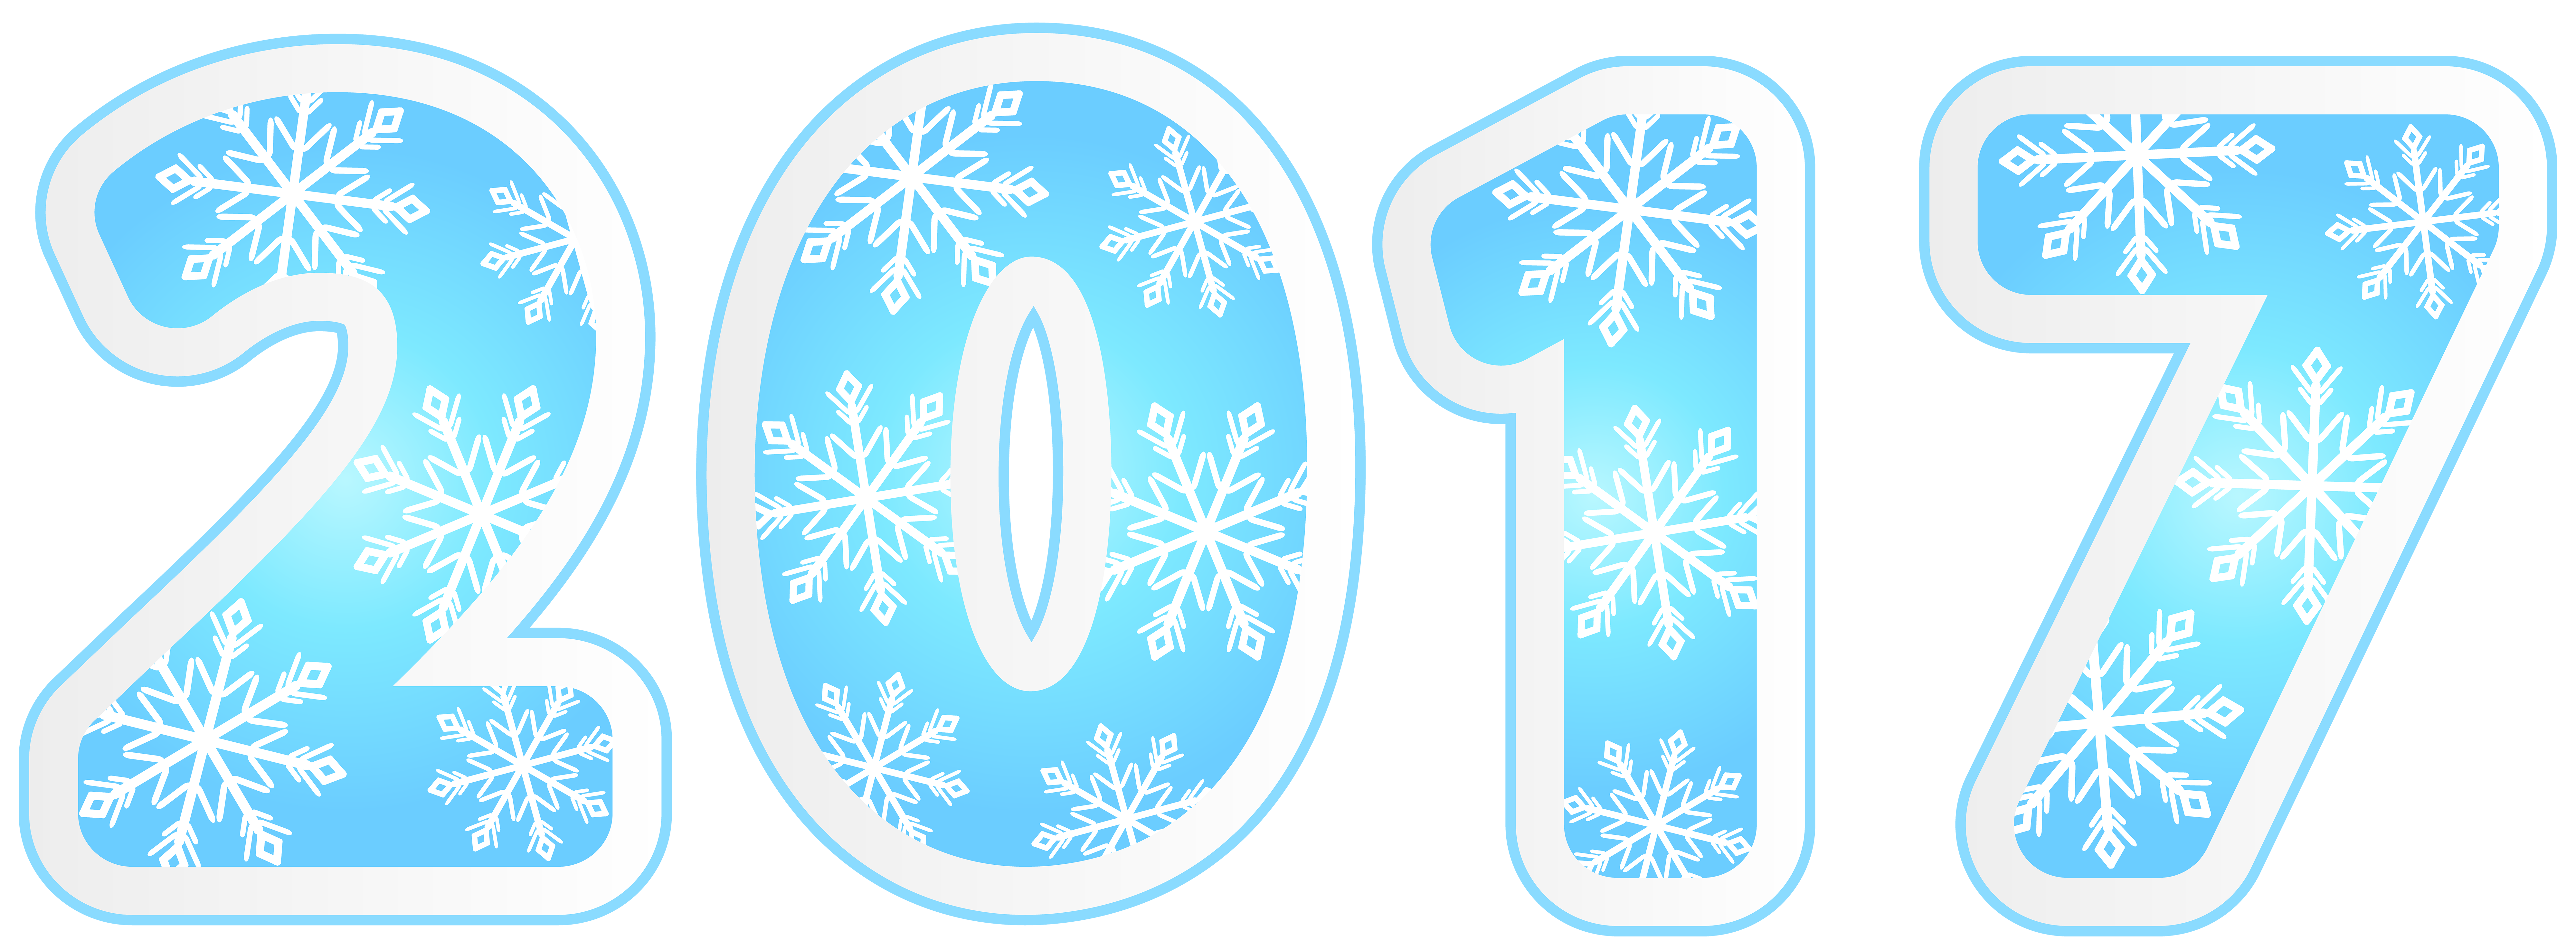 2017 with Snowflakes PNG Clipart Image 